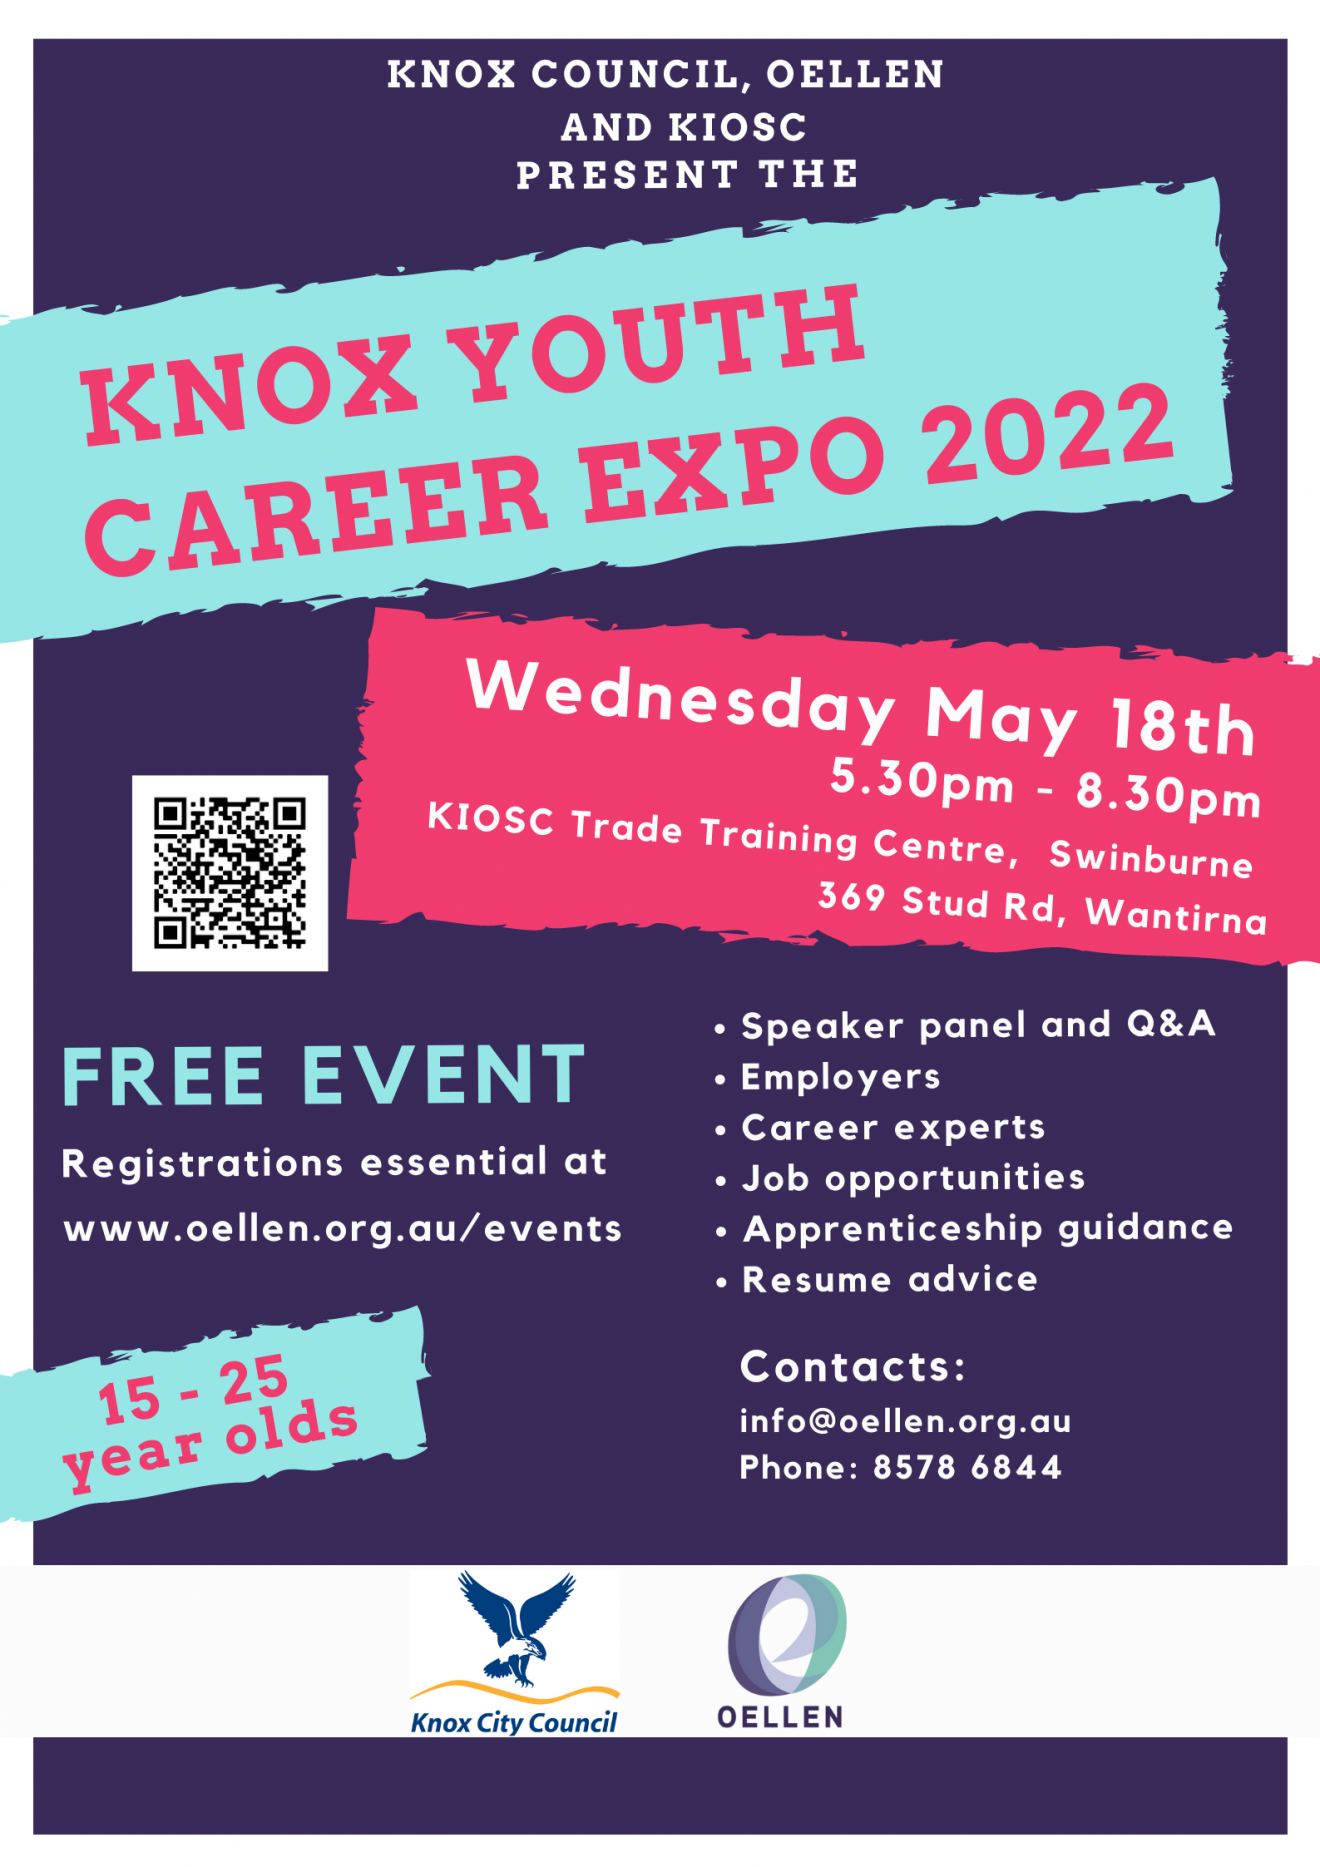 Knox Youth Career Expo Poster 2022 v2